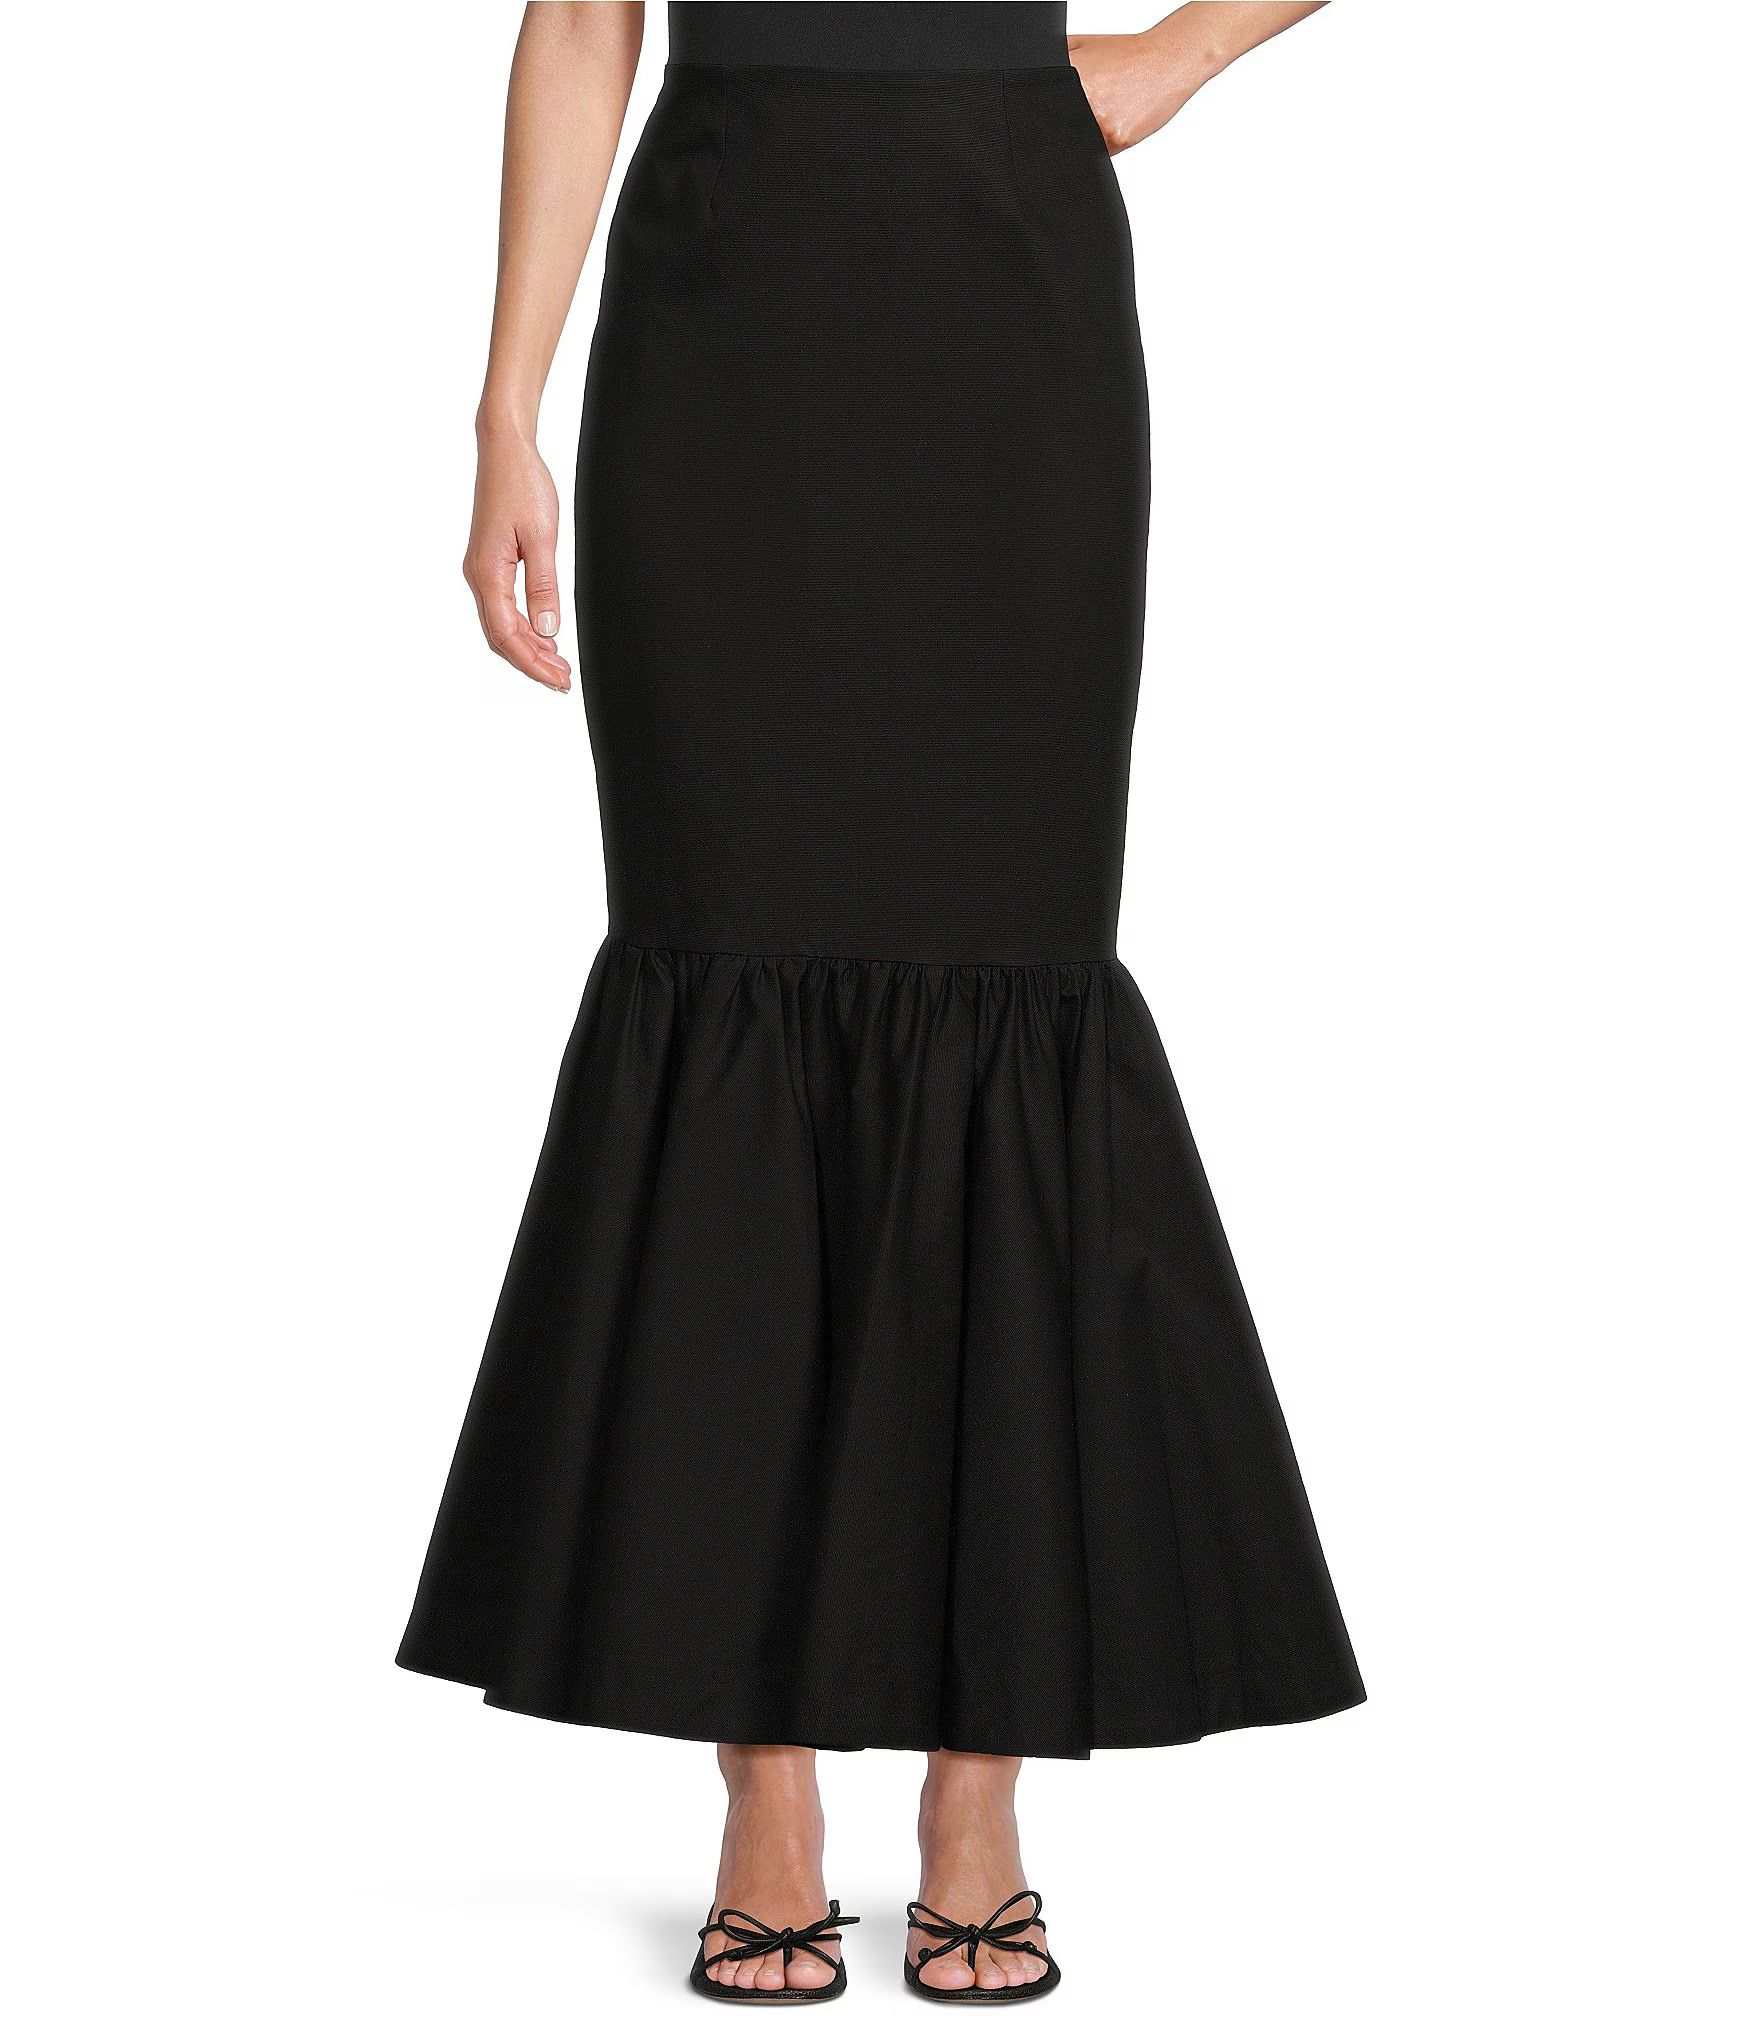 x The Style Bungalow Amore Mermaid Hem Fit and Flare Skirt | Dillard's